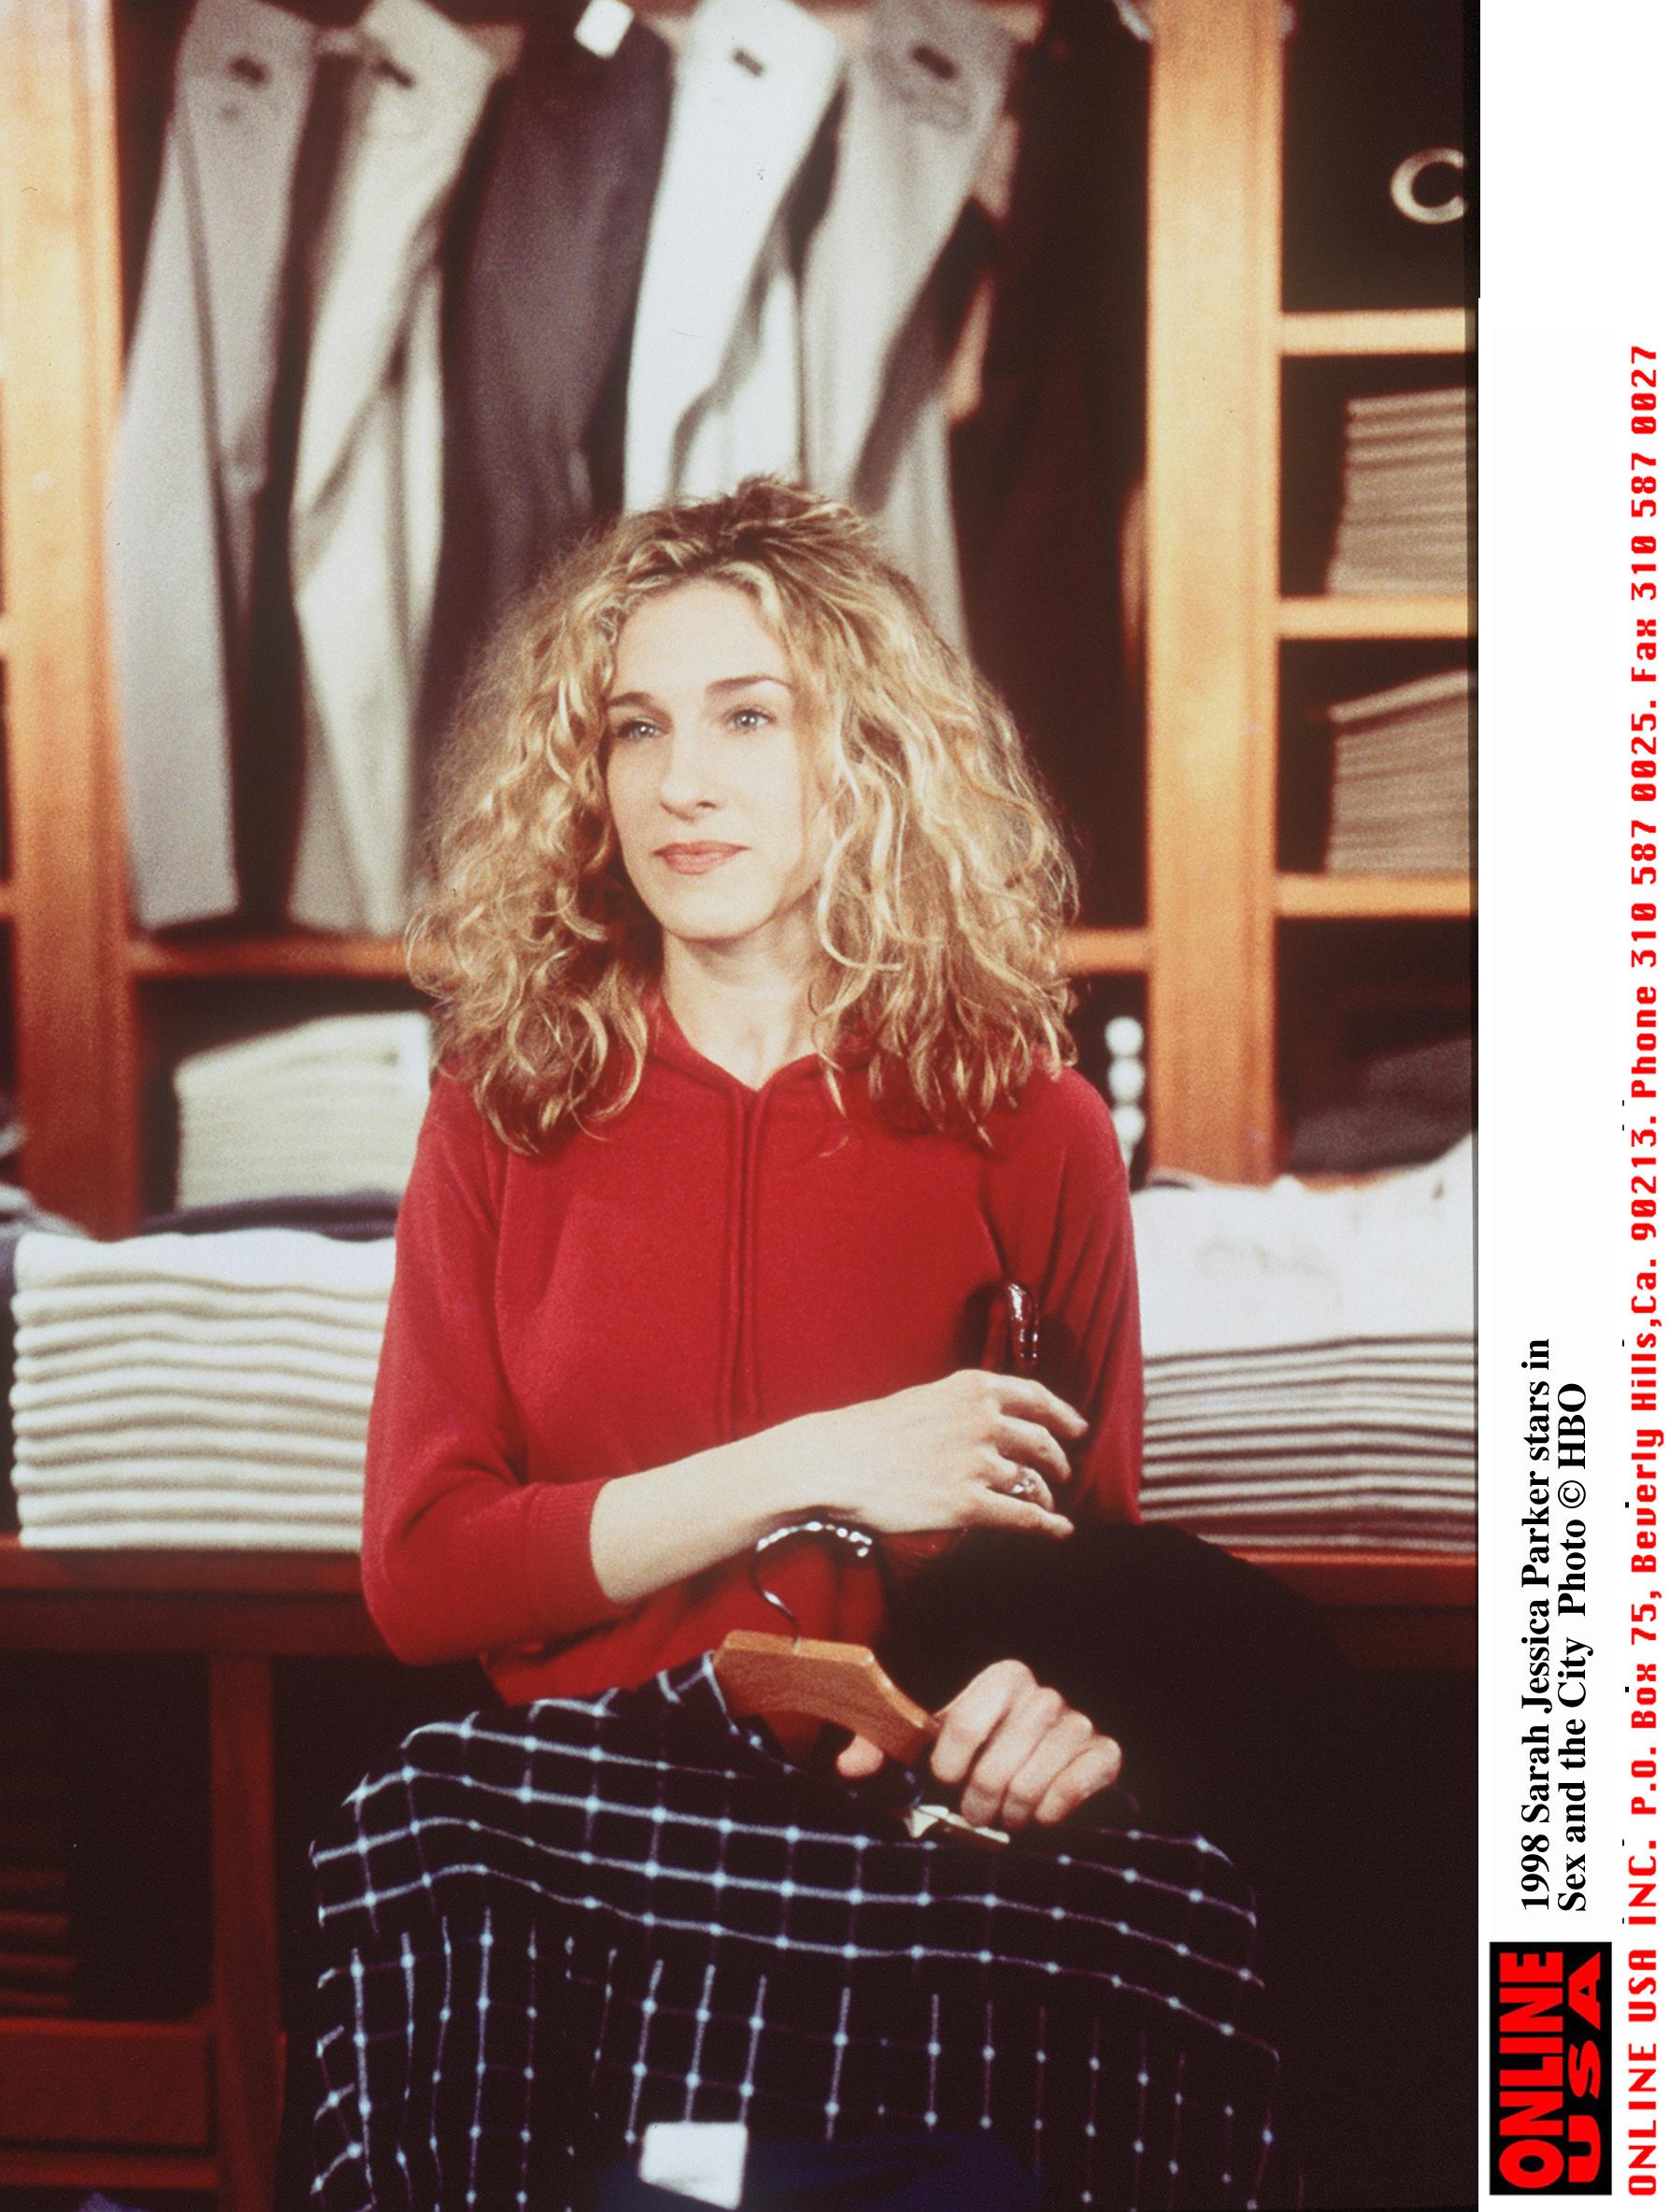 Sarah Jessica Parker stars in "Sex and the City" in 1998 | Source: Getty Images